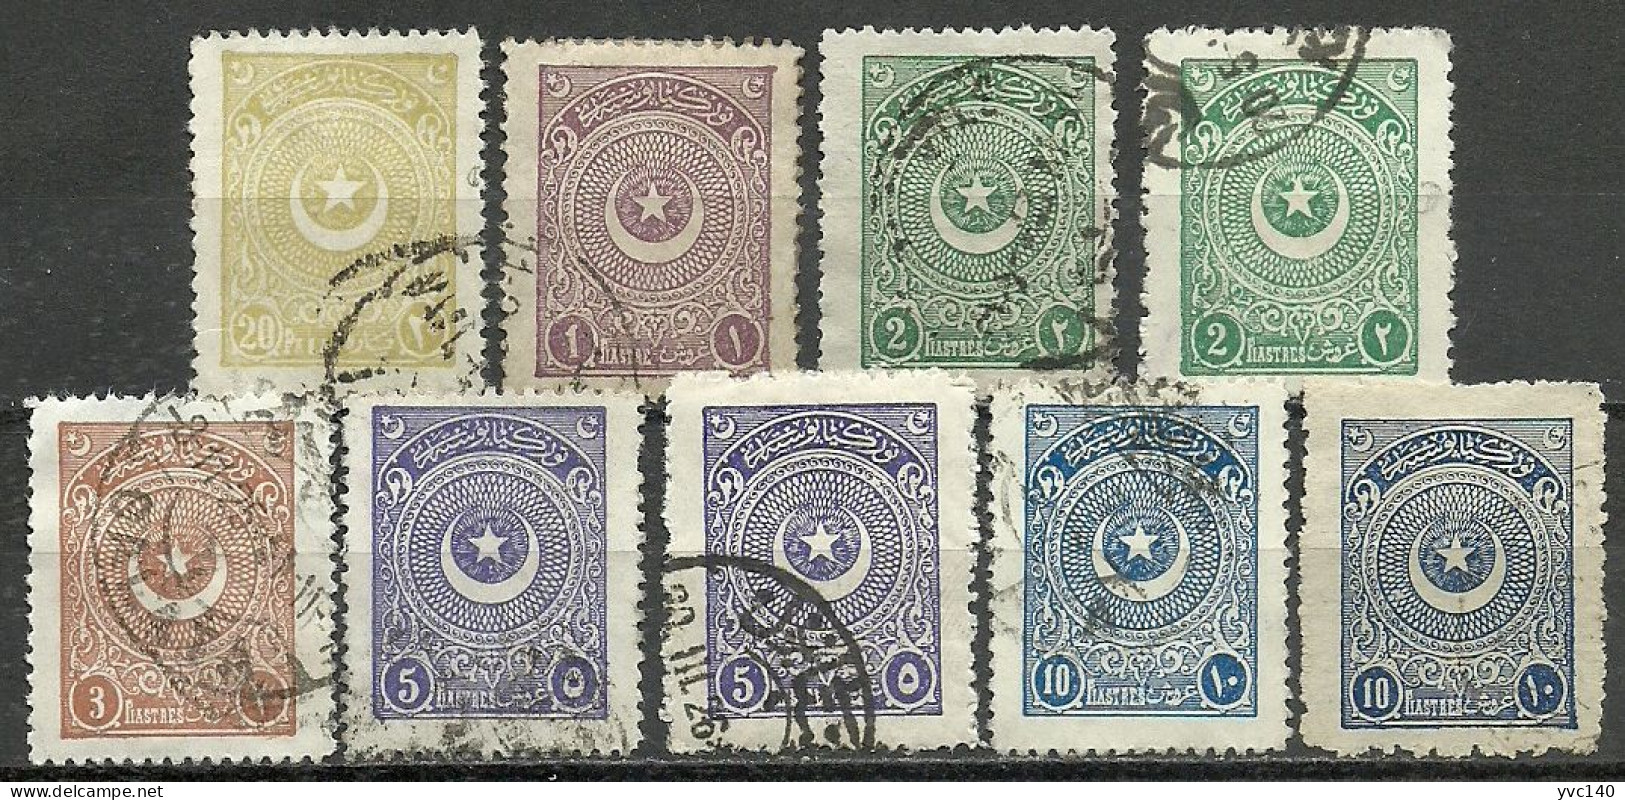 Turkey; 1924 3rd Star&Crescent Issue Stamps - Used Stamps